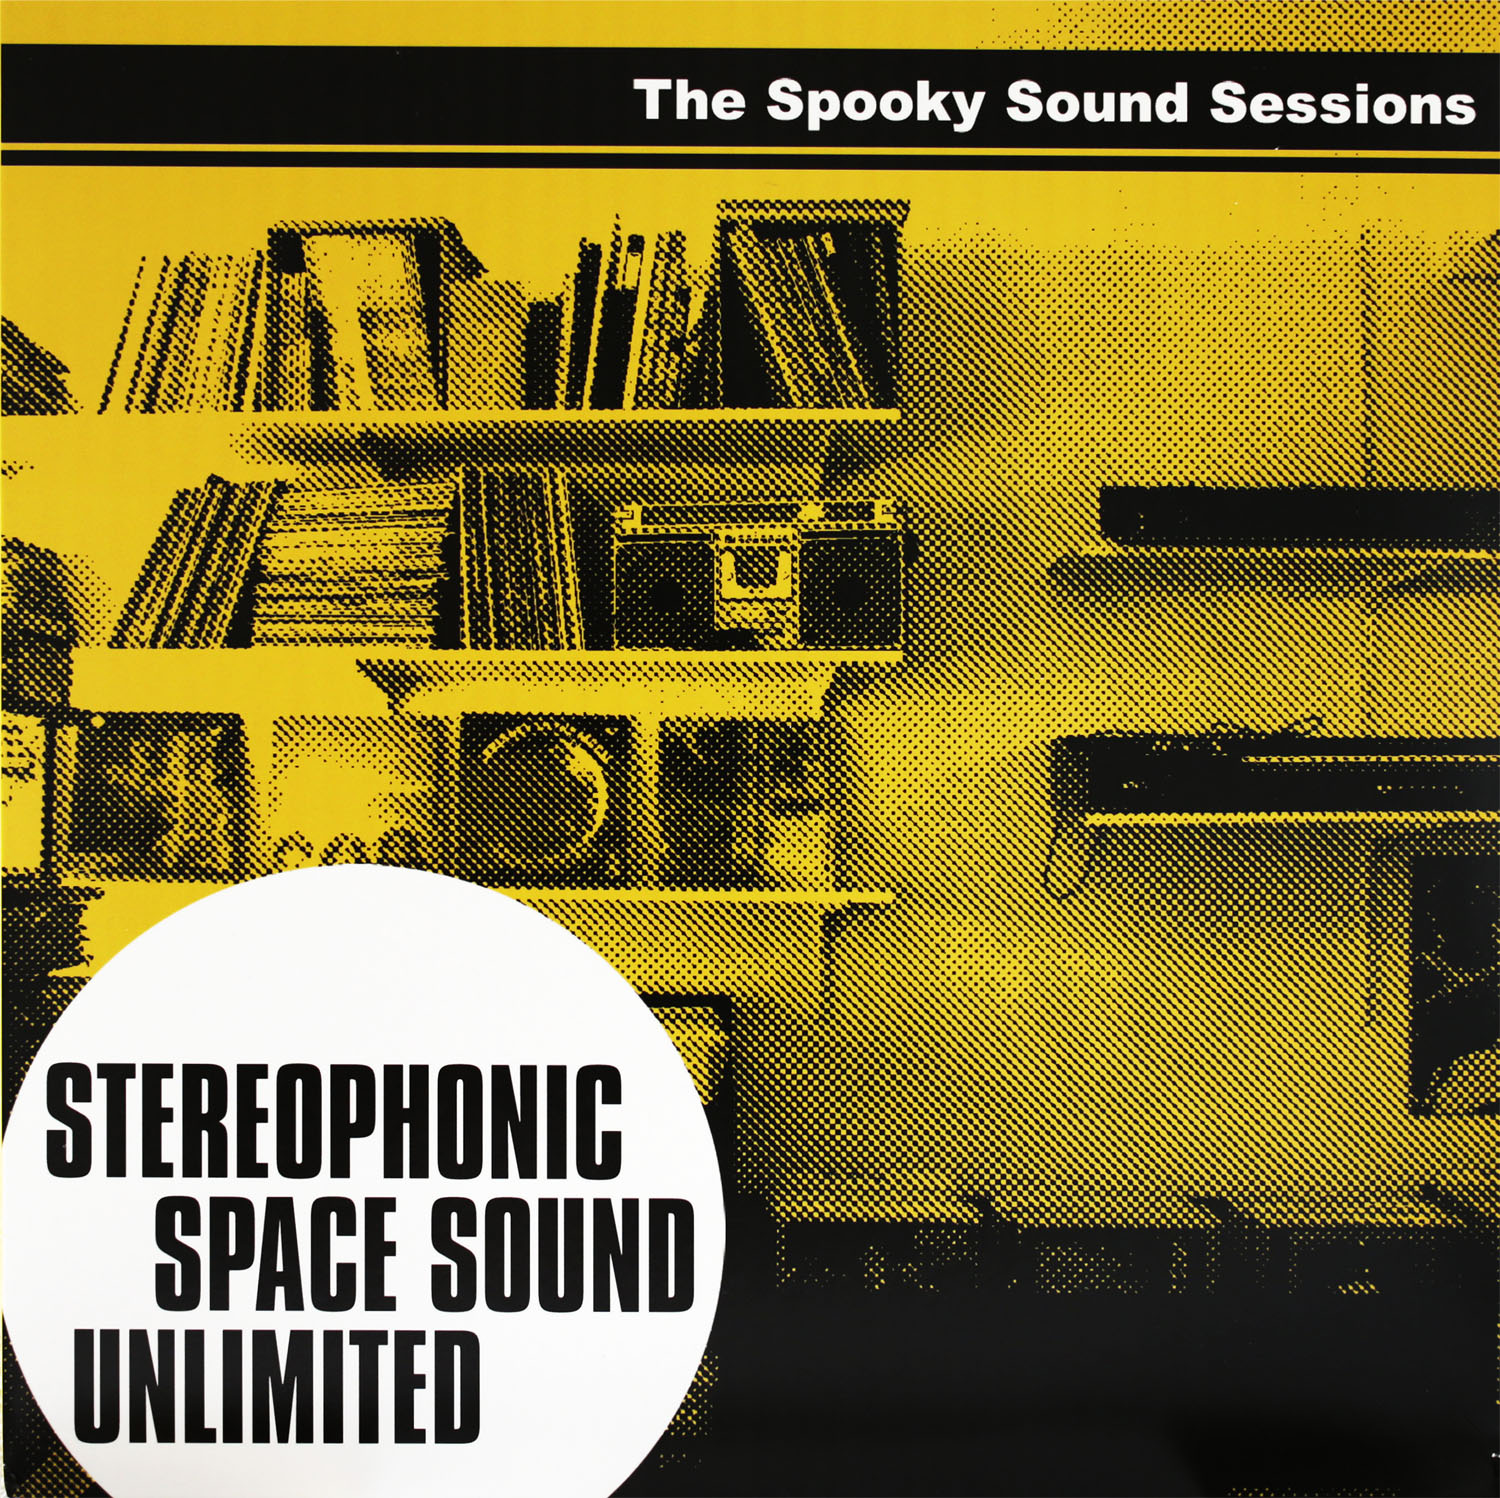  Stereophonic Space Sound Unlimited  The Spooky Sound Sessions 